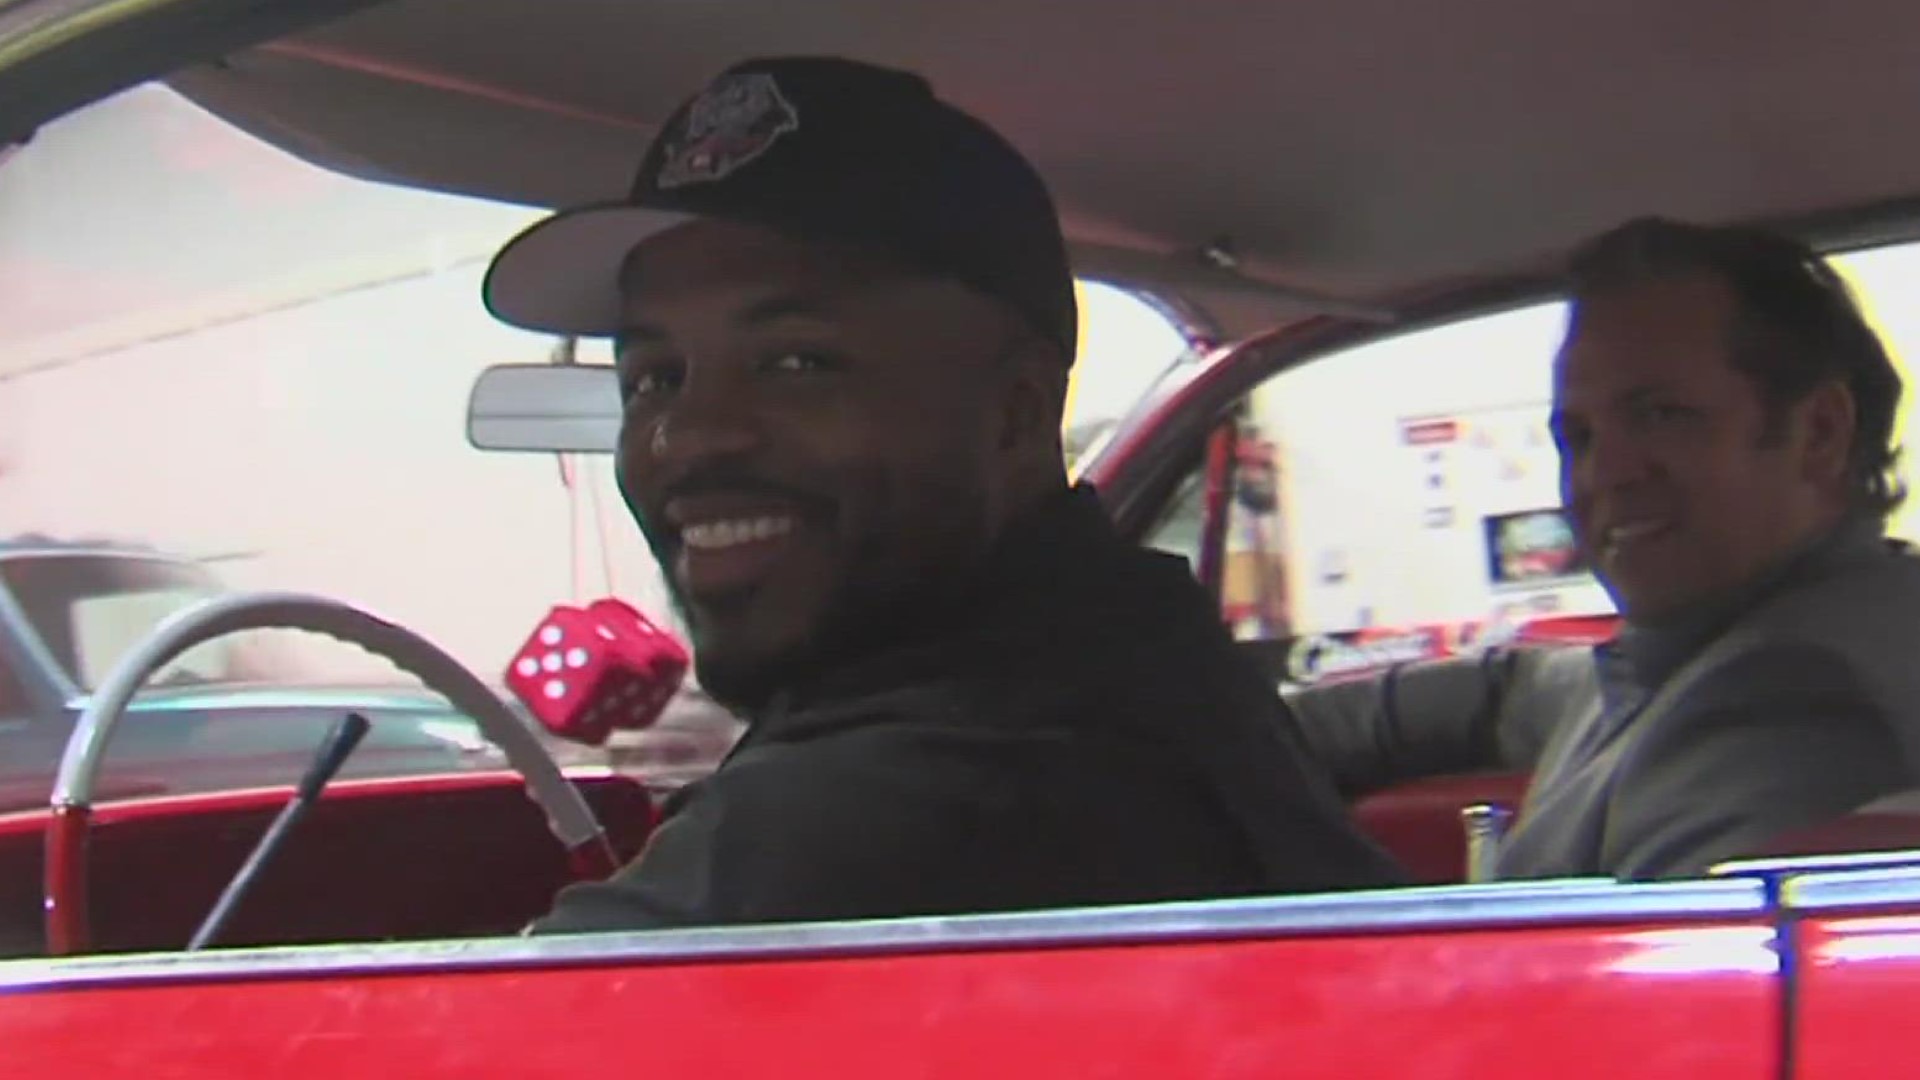 Jaron Jackson is a unique Corpus Christi success story. He flipped his first classic car for profit, launching a highly successful Black-owned business.